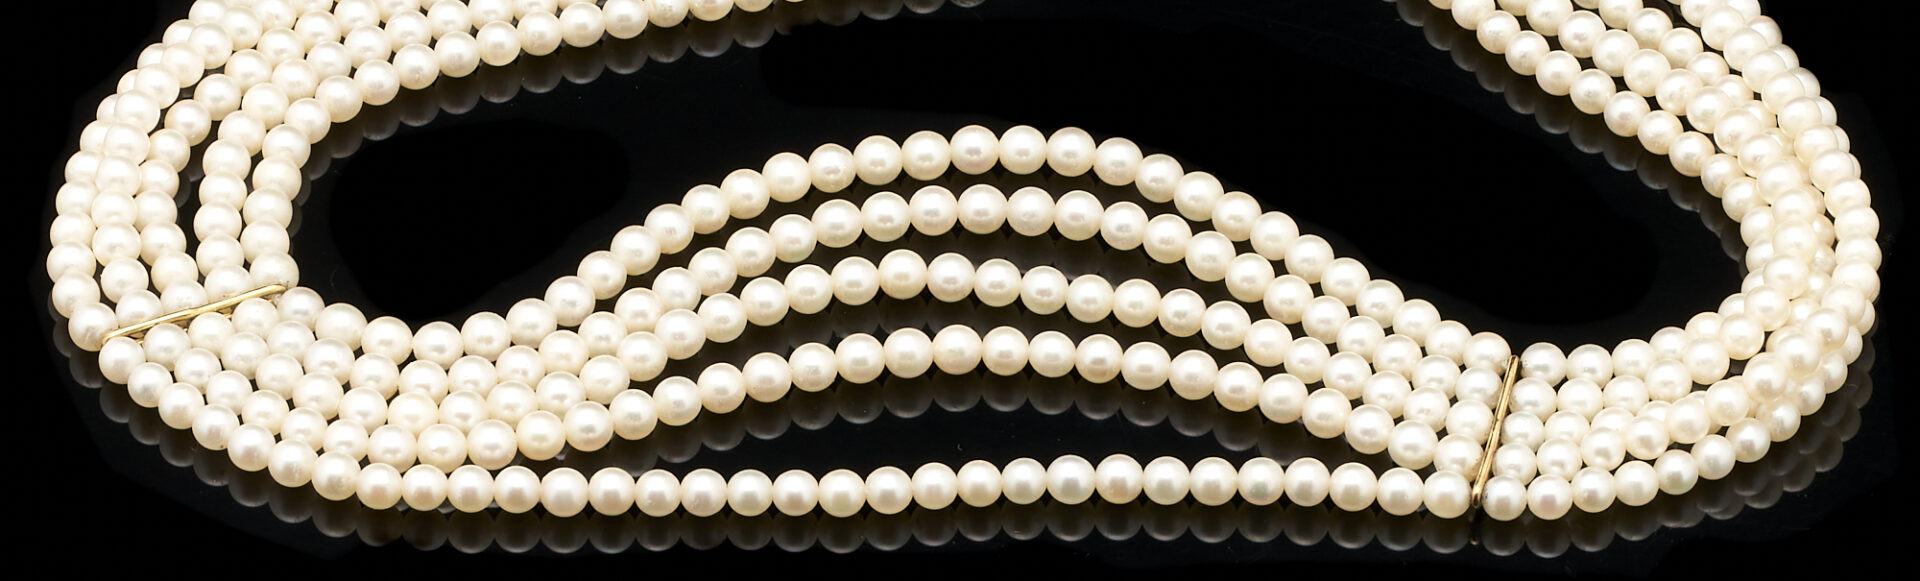 Lot 427: Multi-strand Pearl Necklace plus 2 Bracelets: Pearl, Coral (3 items)